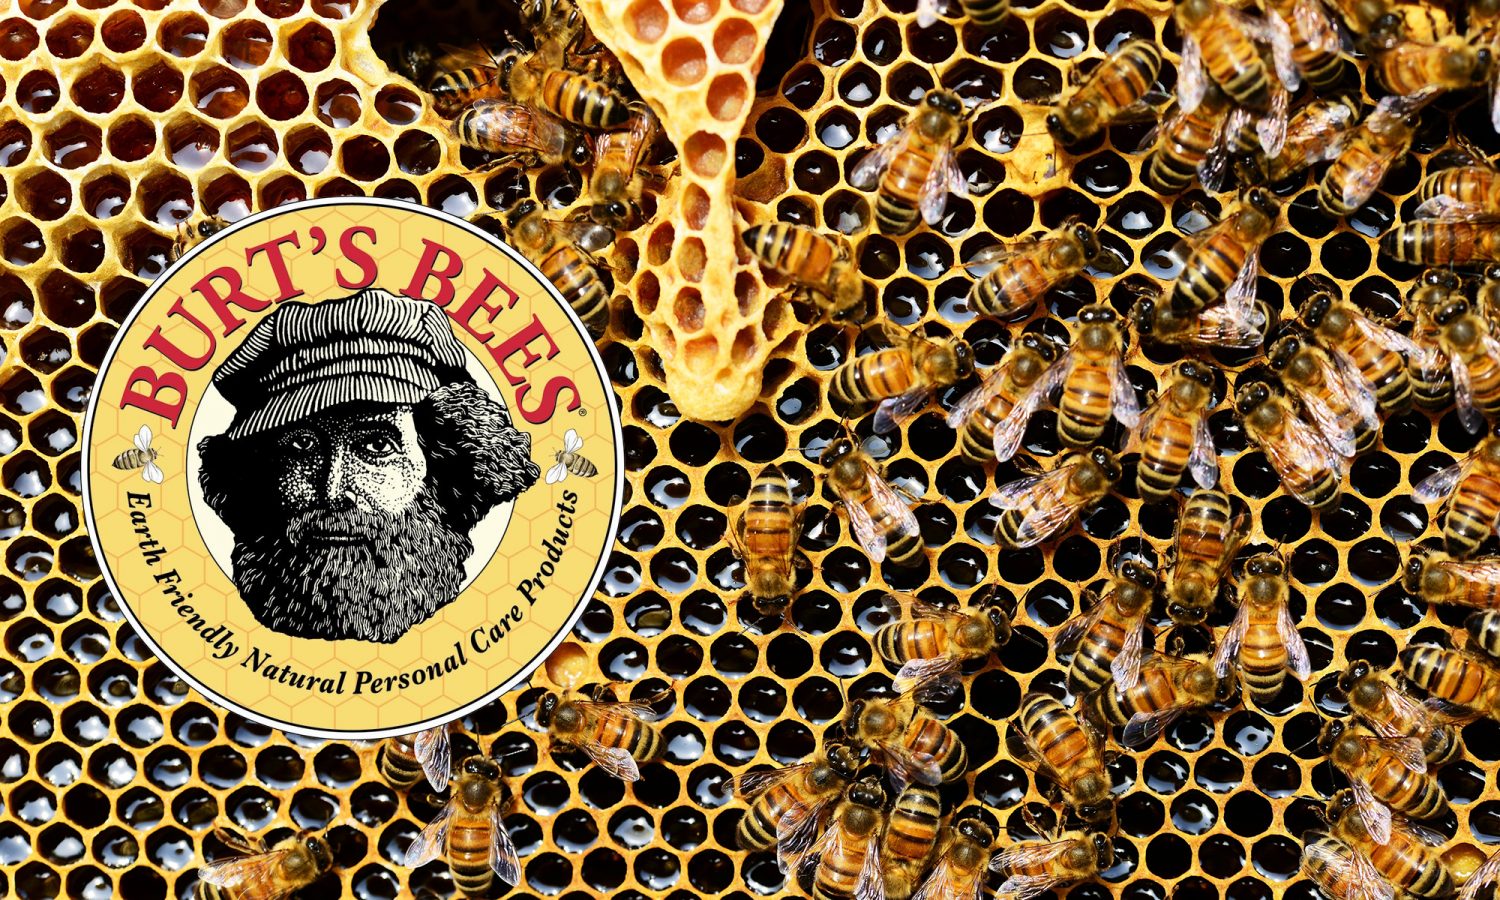 burts bees beyond business groups scaled